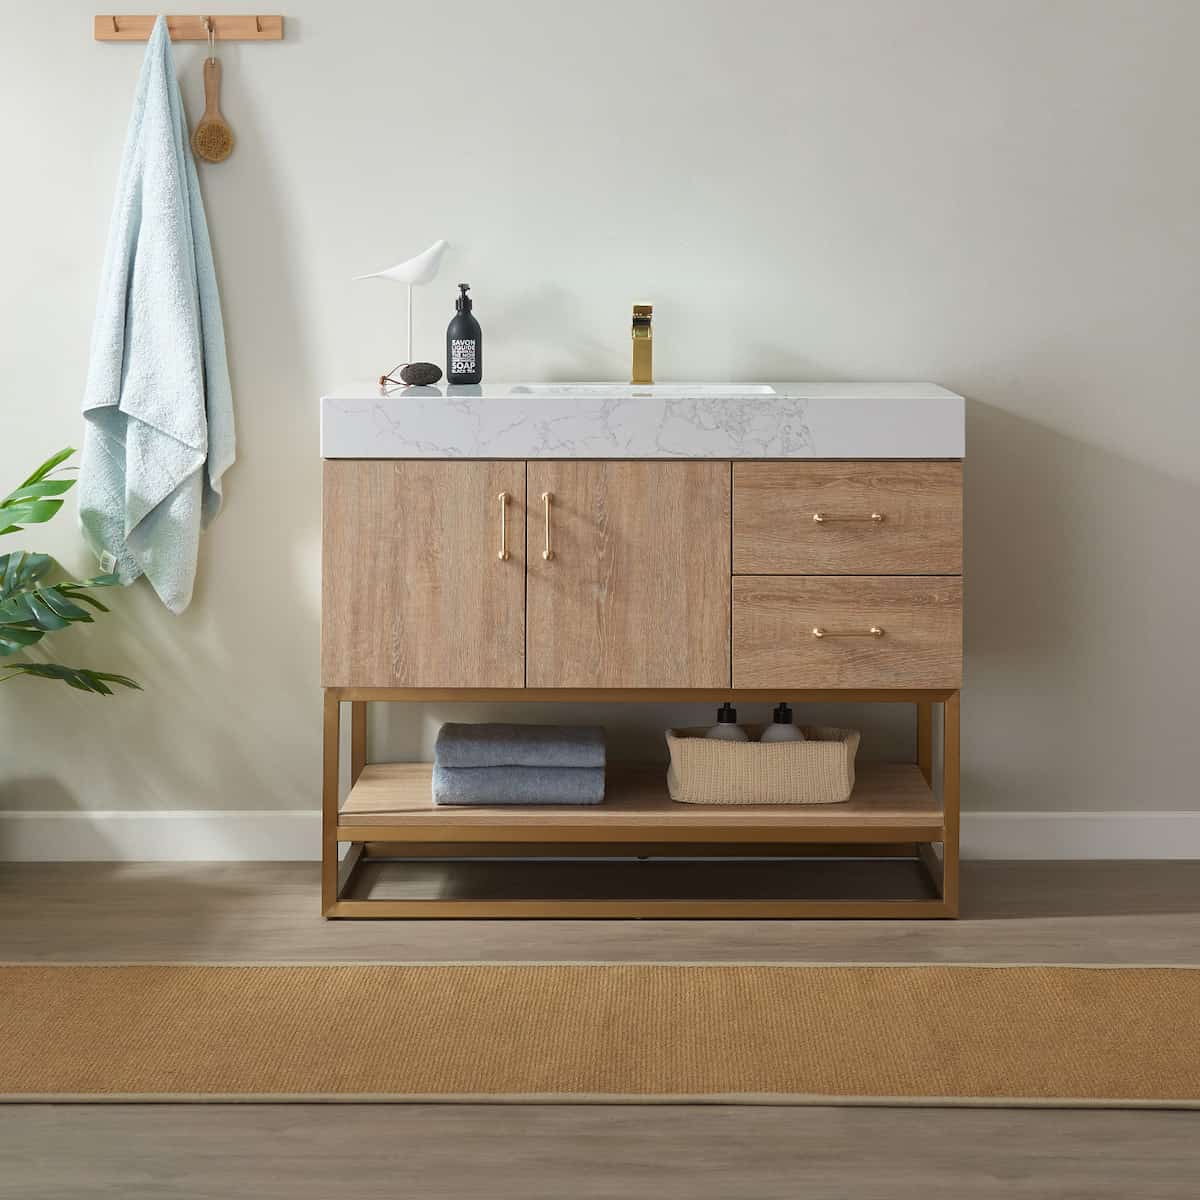 Vinnova Alistair 42 Inch Freestanding Single Vanity in North American Oak and Brushed Gold Frame with White Grain Stone Countertop Without Mirror in Bathroom 789042-NO-GW-NM